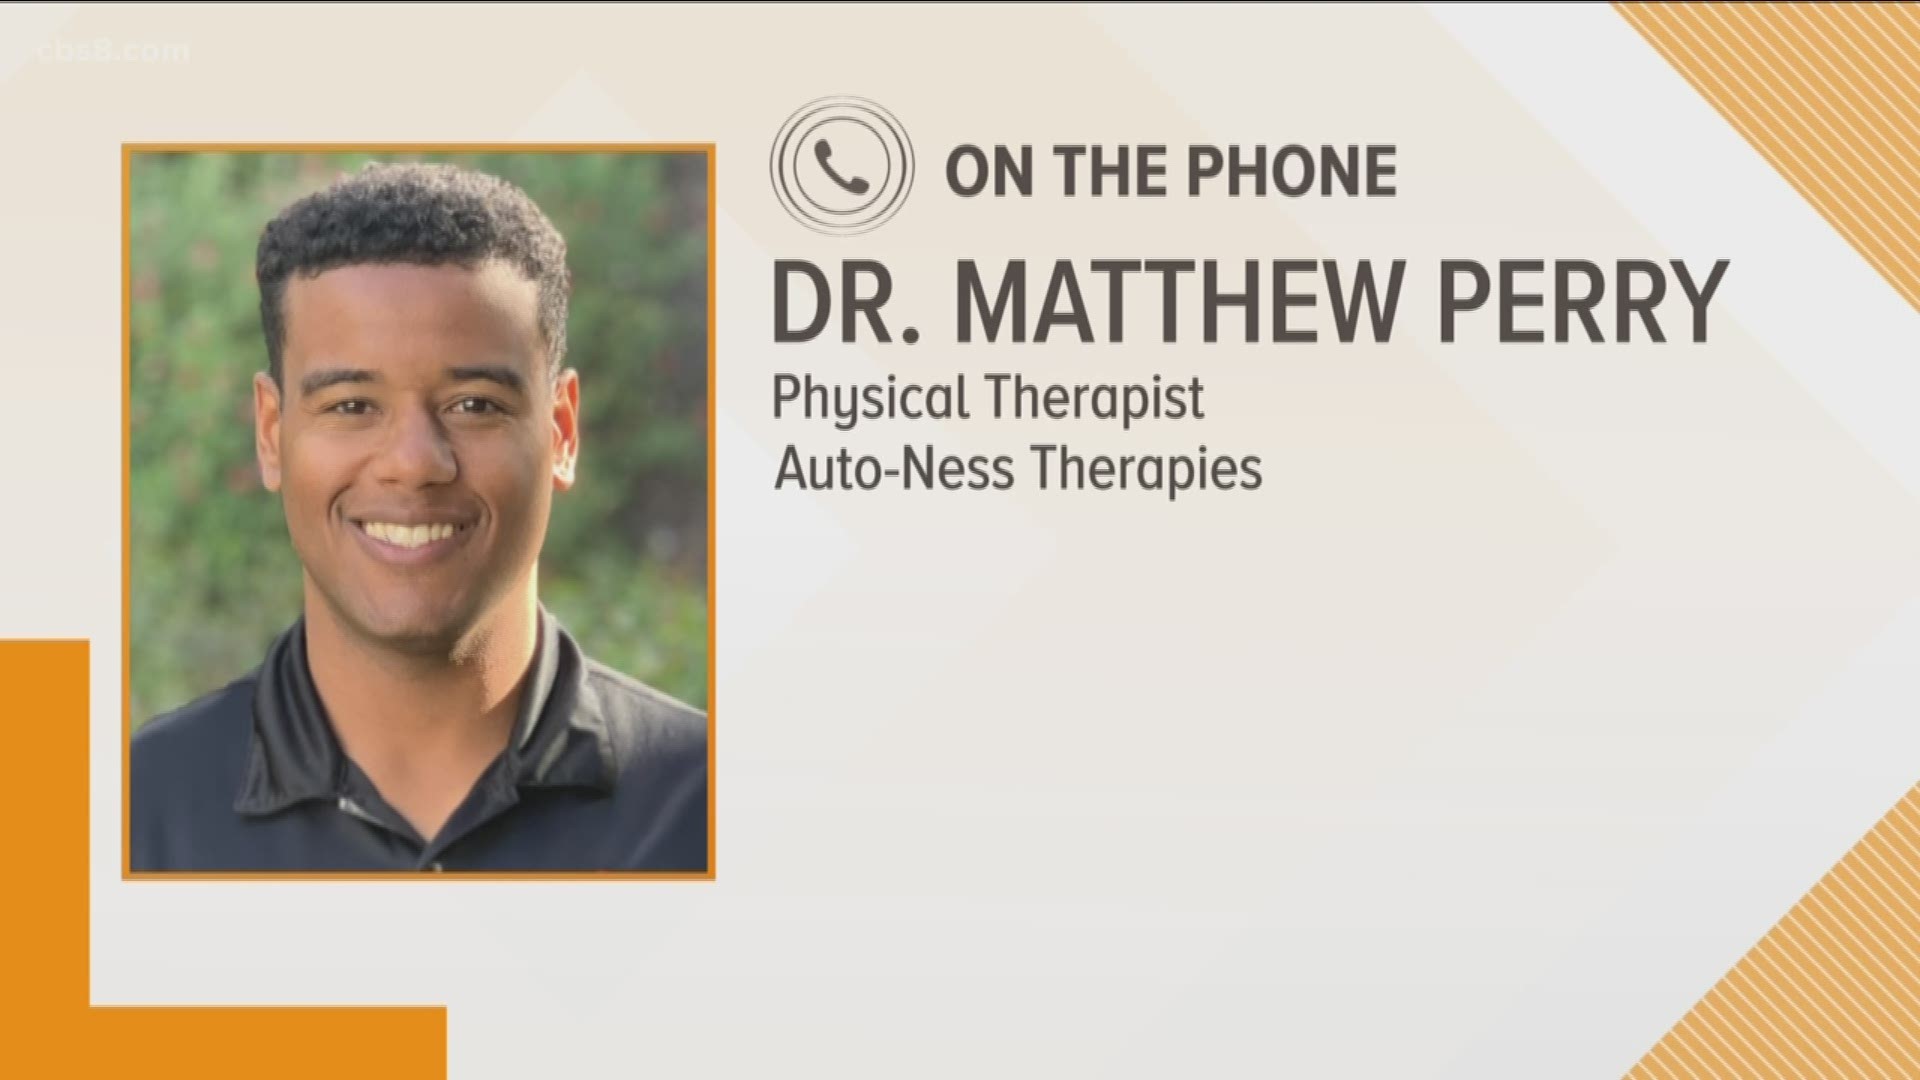 Auto-Ness Physical Therapist, Dr. Matthew Perry talked about how patients can still get therapy & how patients can stay accountable. www.antherapies.com